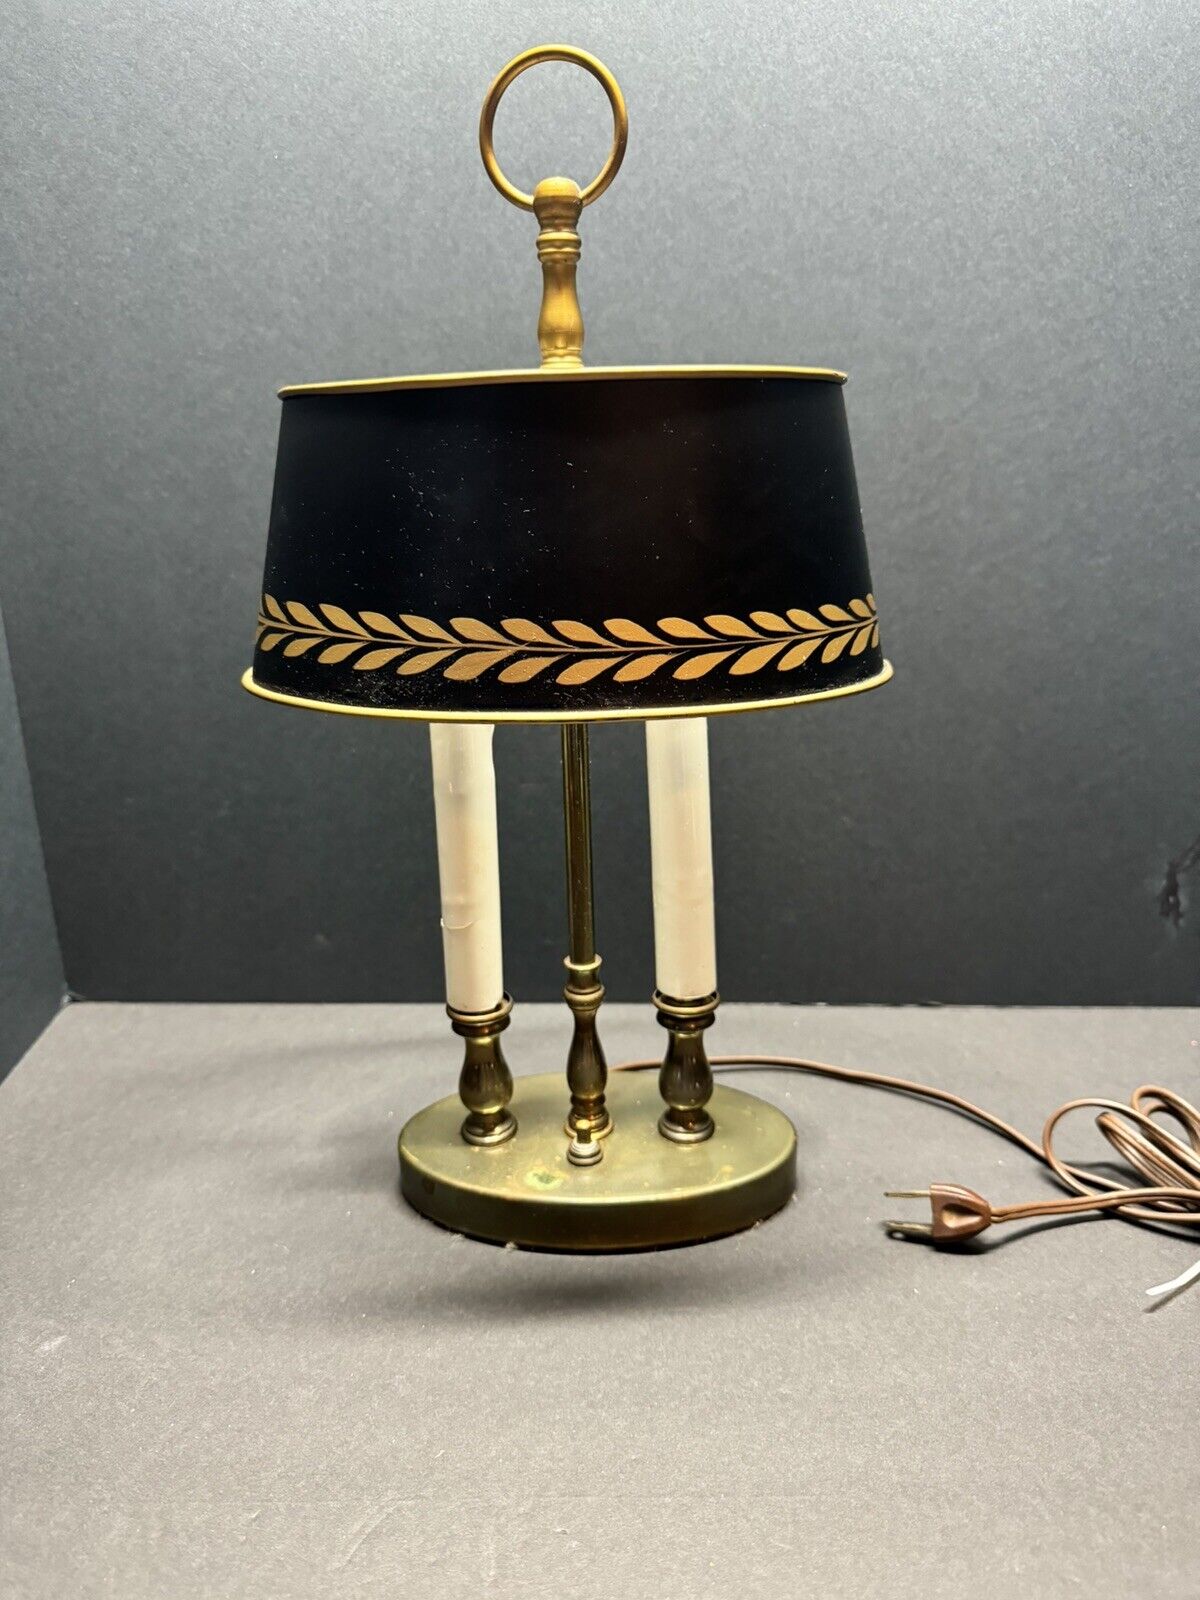 DESK LAMP-BOULIETTE FRENCH STYLE-BRASS/METAL-FEDERAL OFFICE - 70s- METAL SHADE